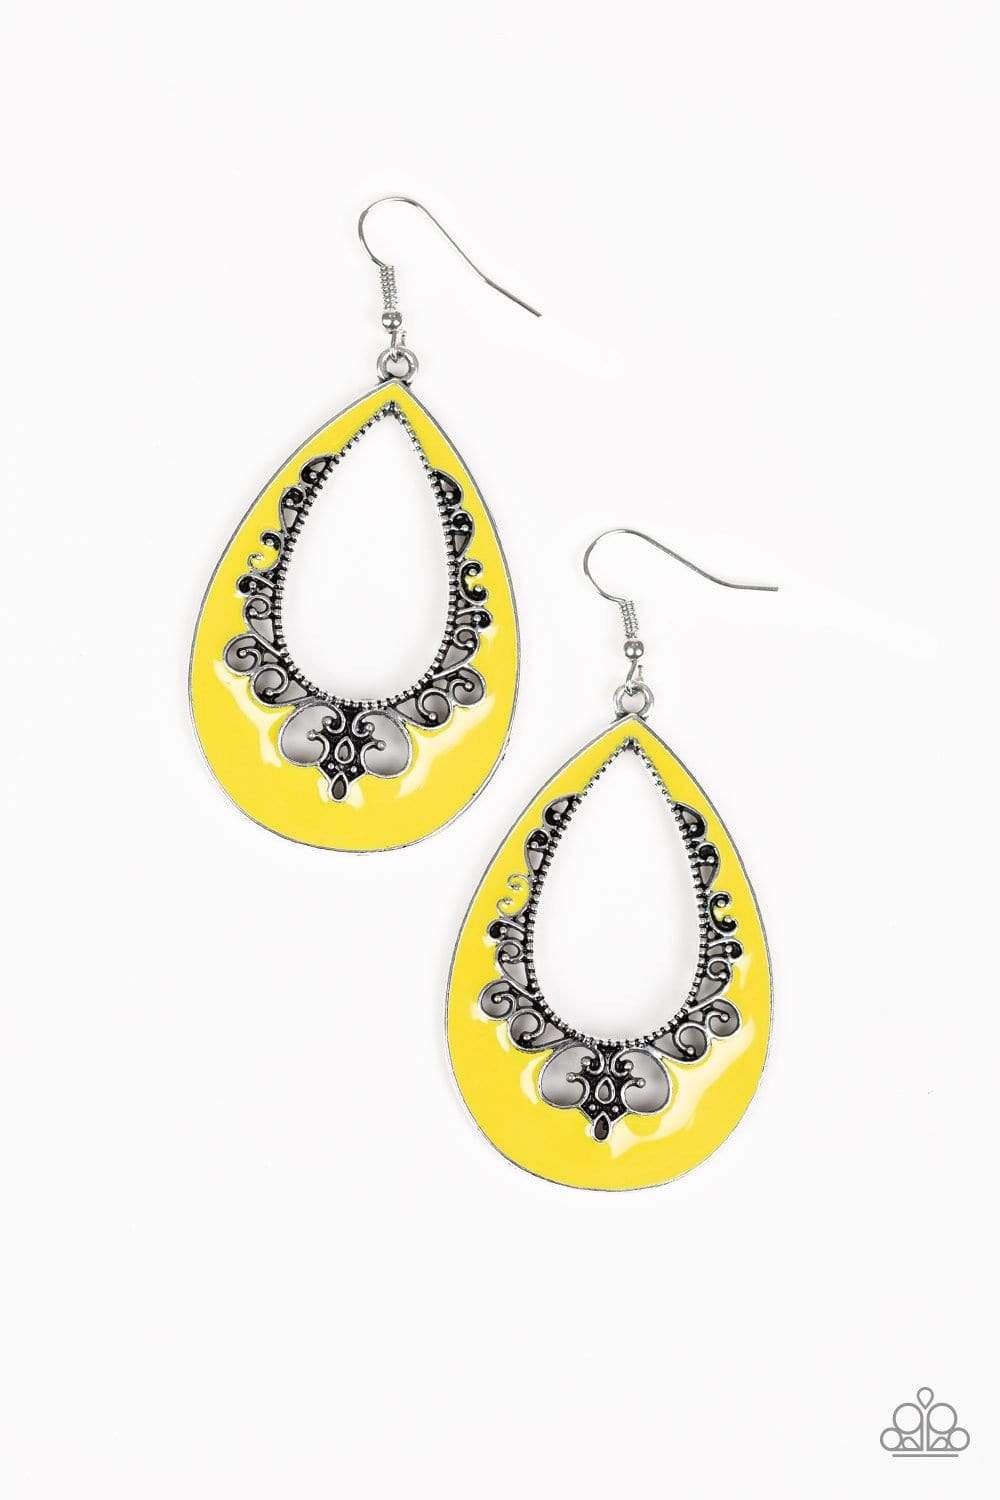 Compliments To The CHIC - Yellow Earrings